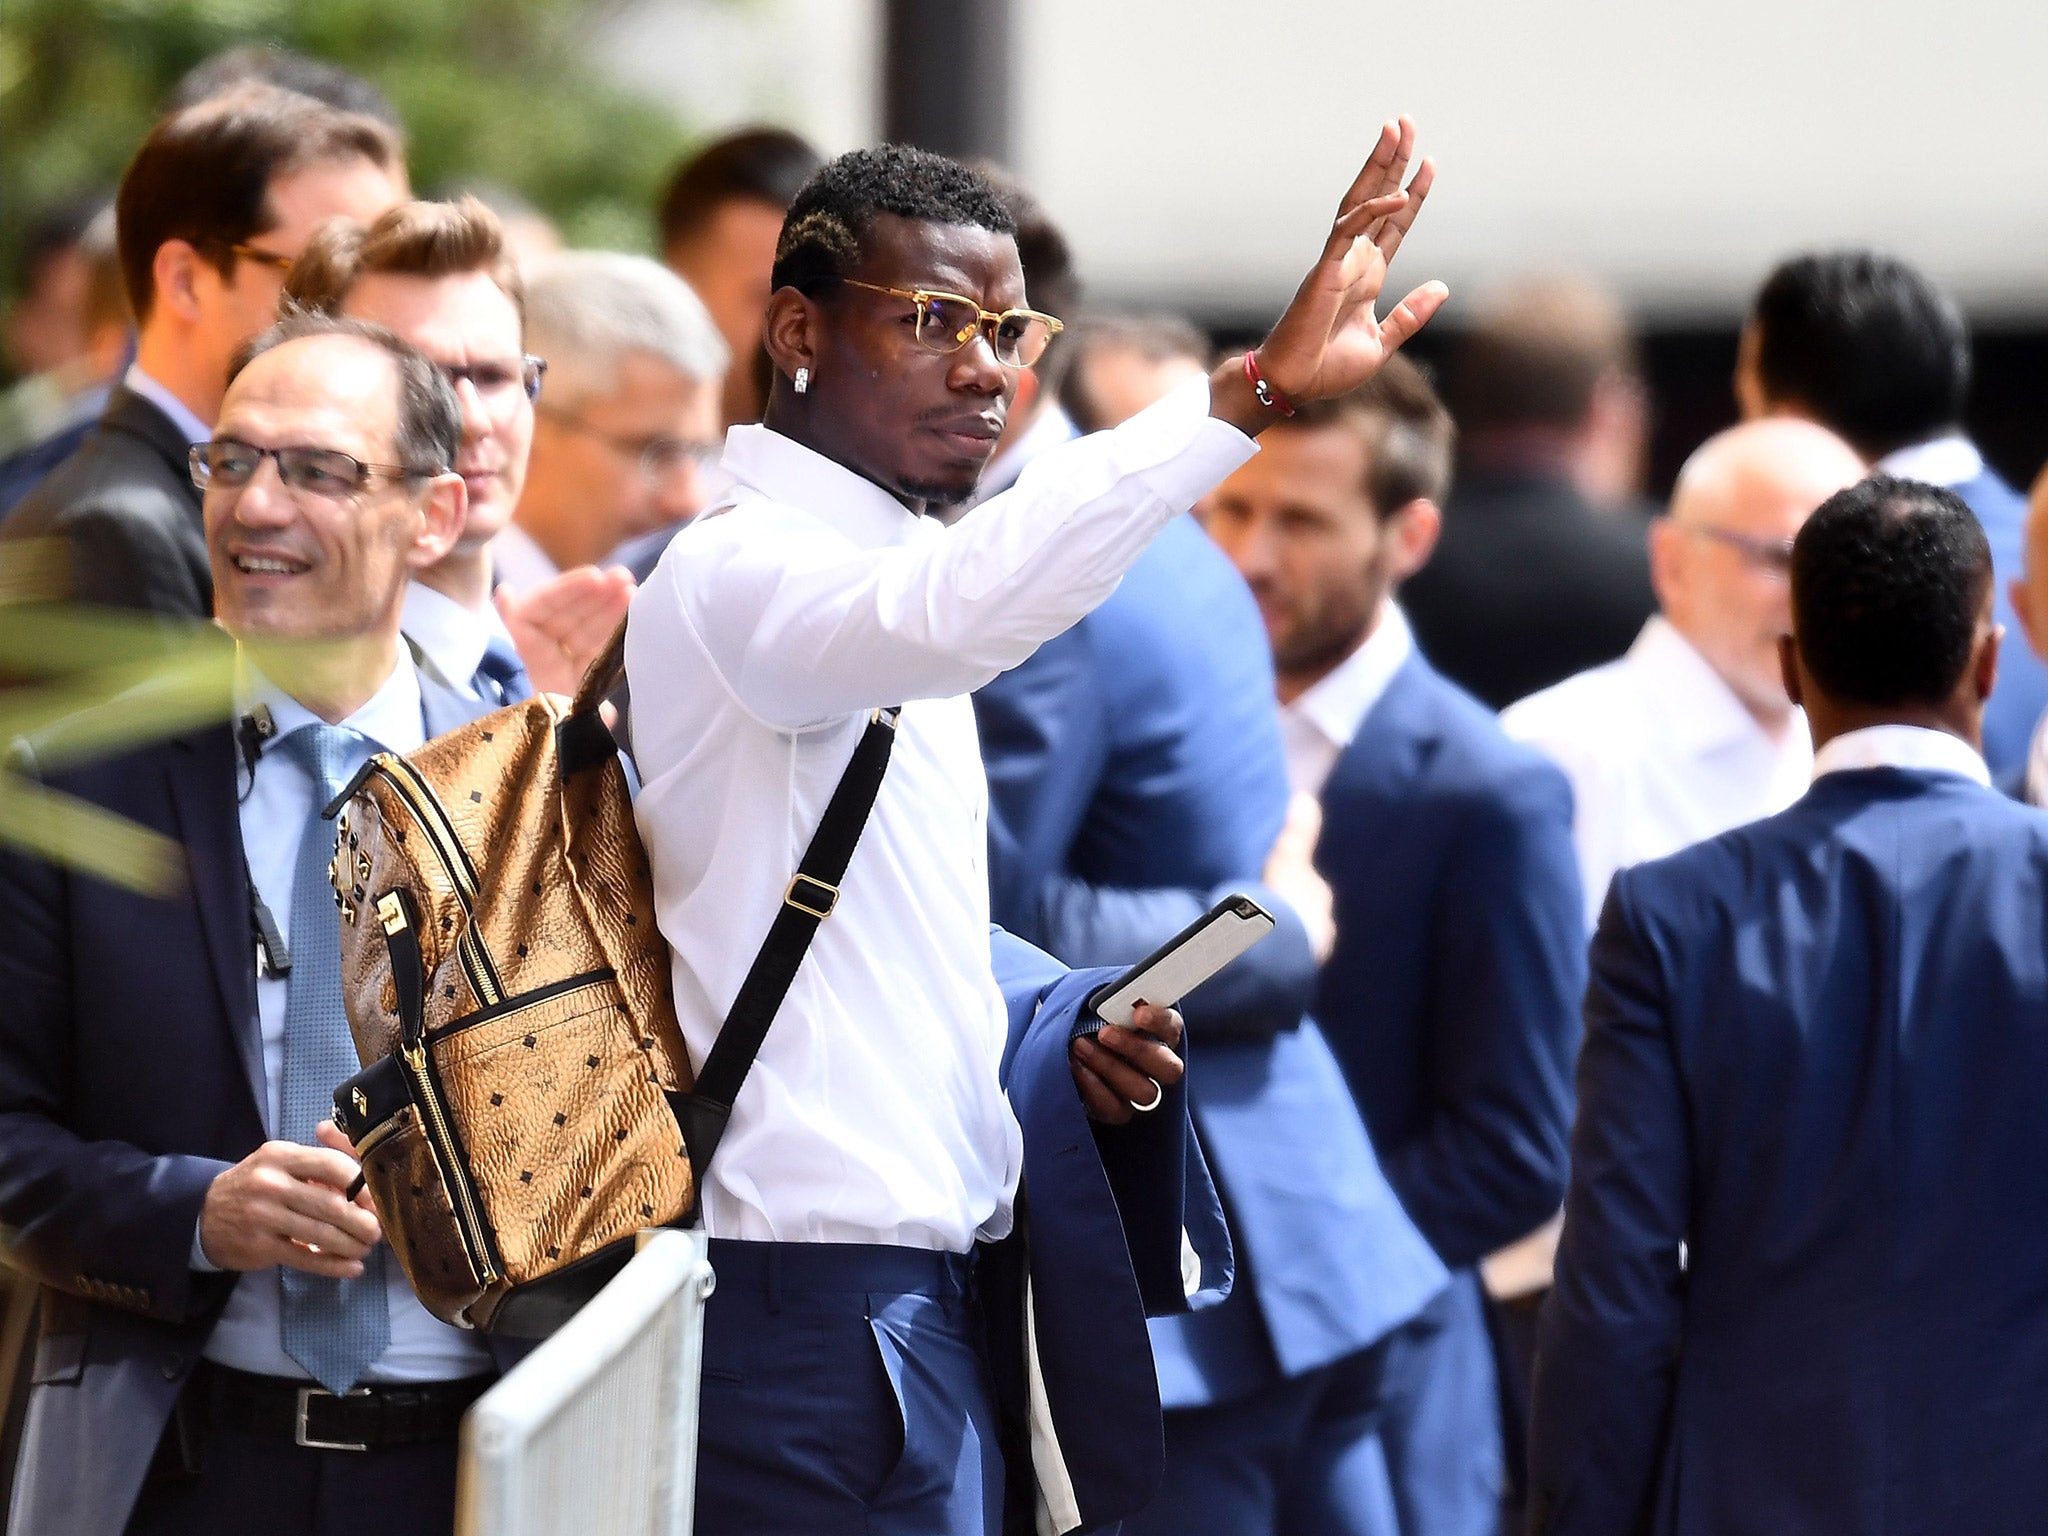 Real Madrid are believed to have scrapped a bid for Paul Pogba